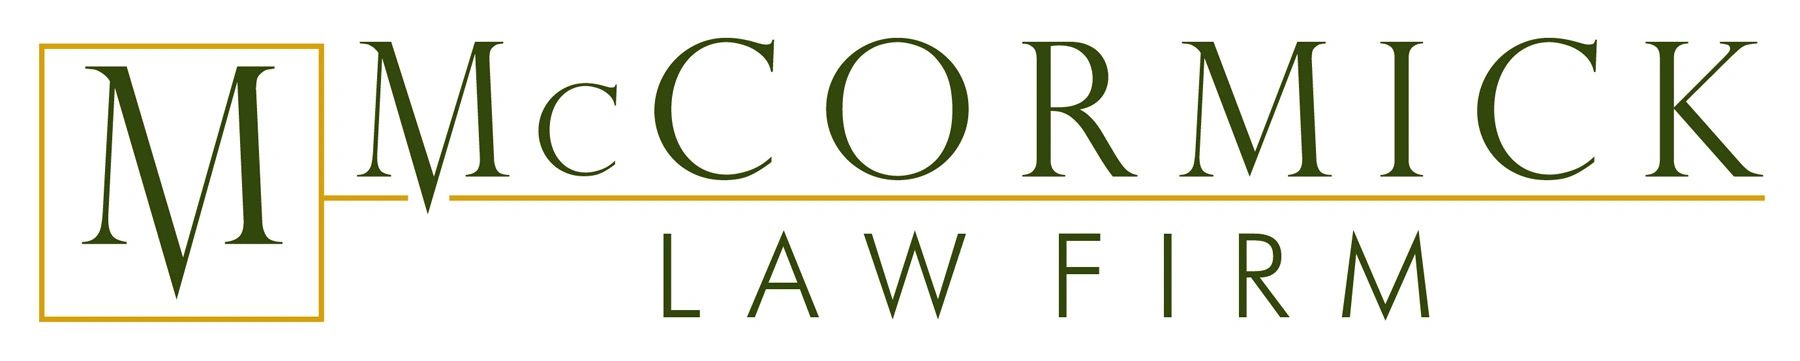 McCormick Law Firm - Top 10 Best Arlington Personal Injury Lawyers